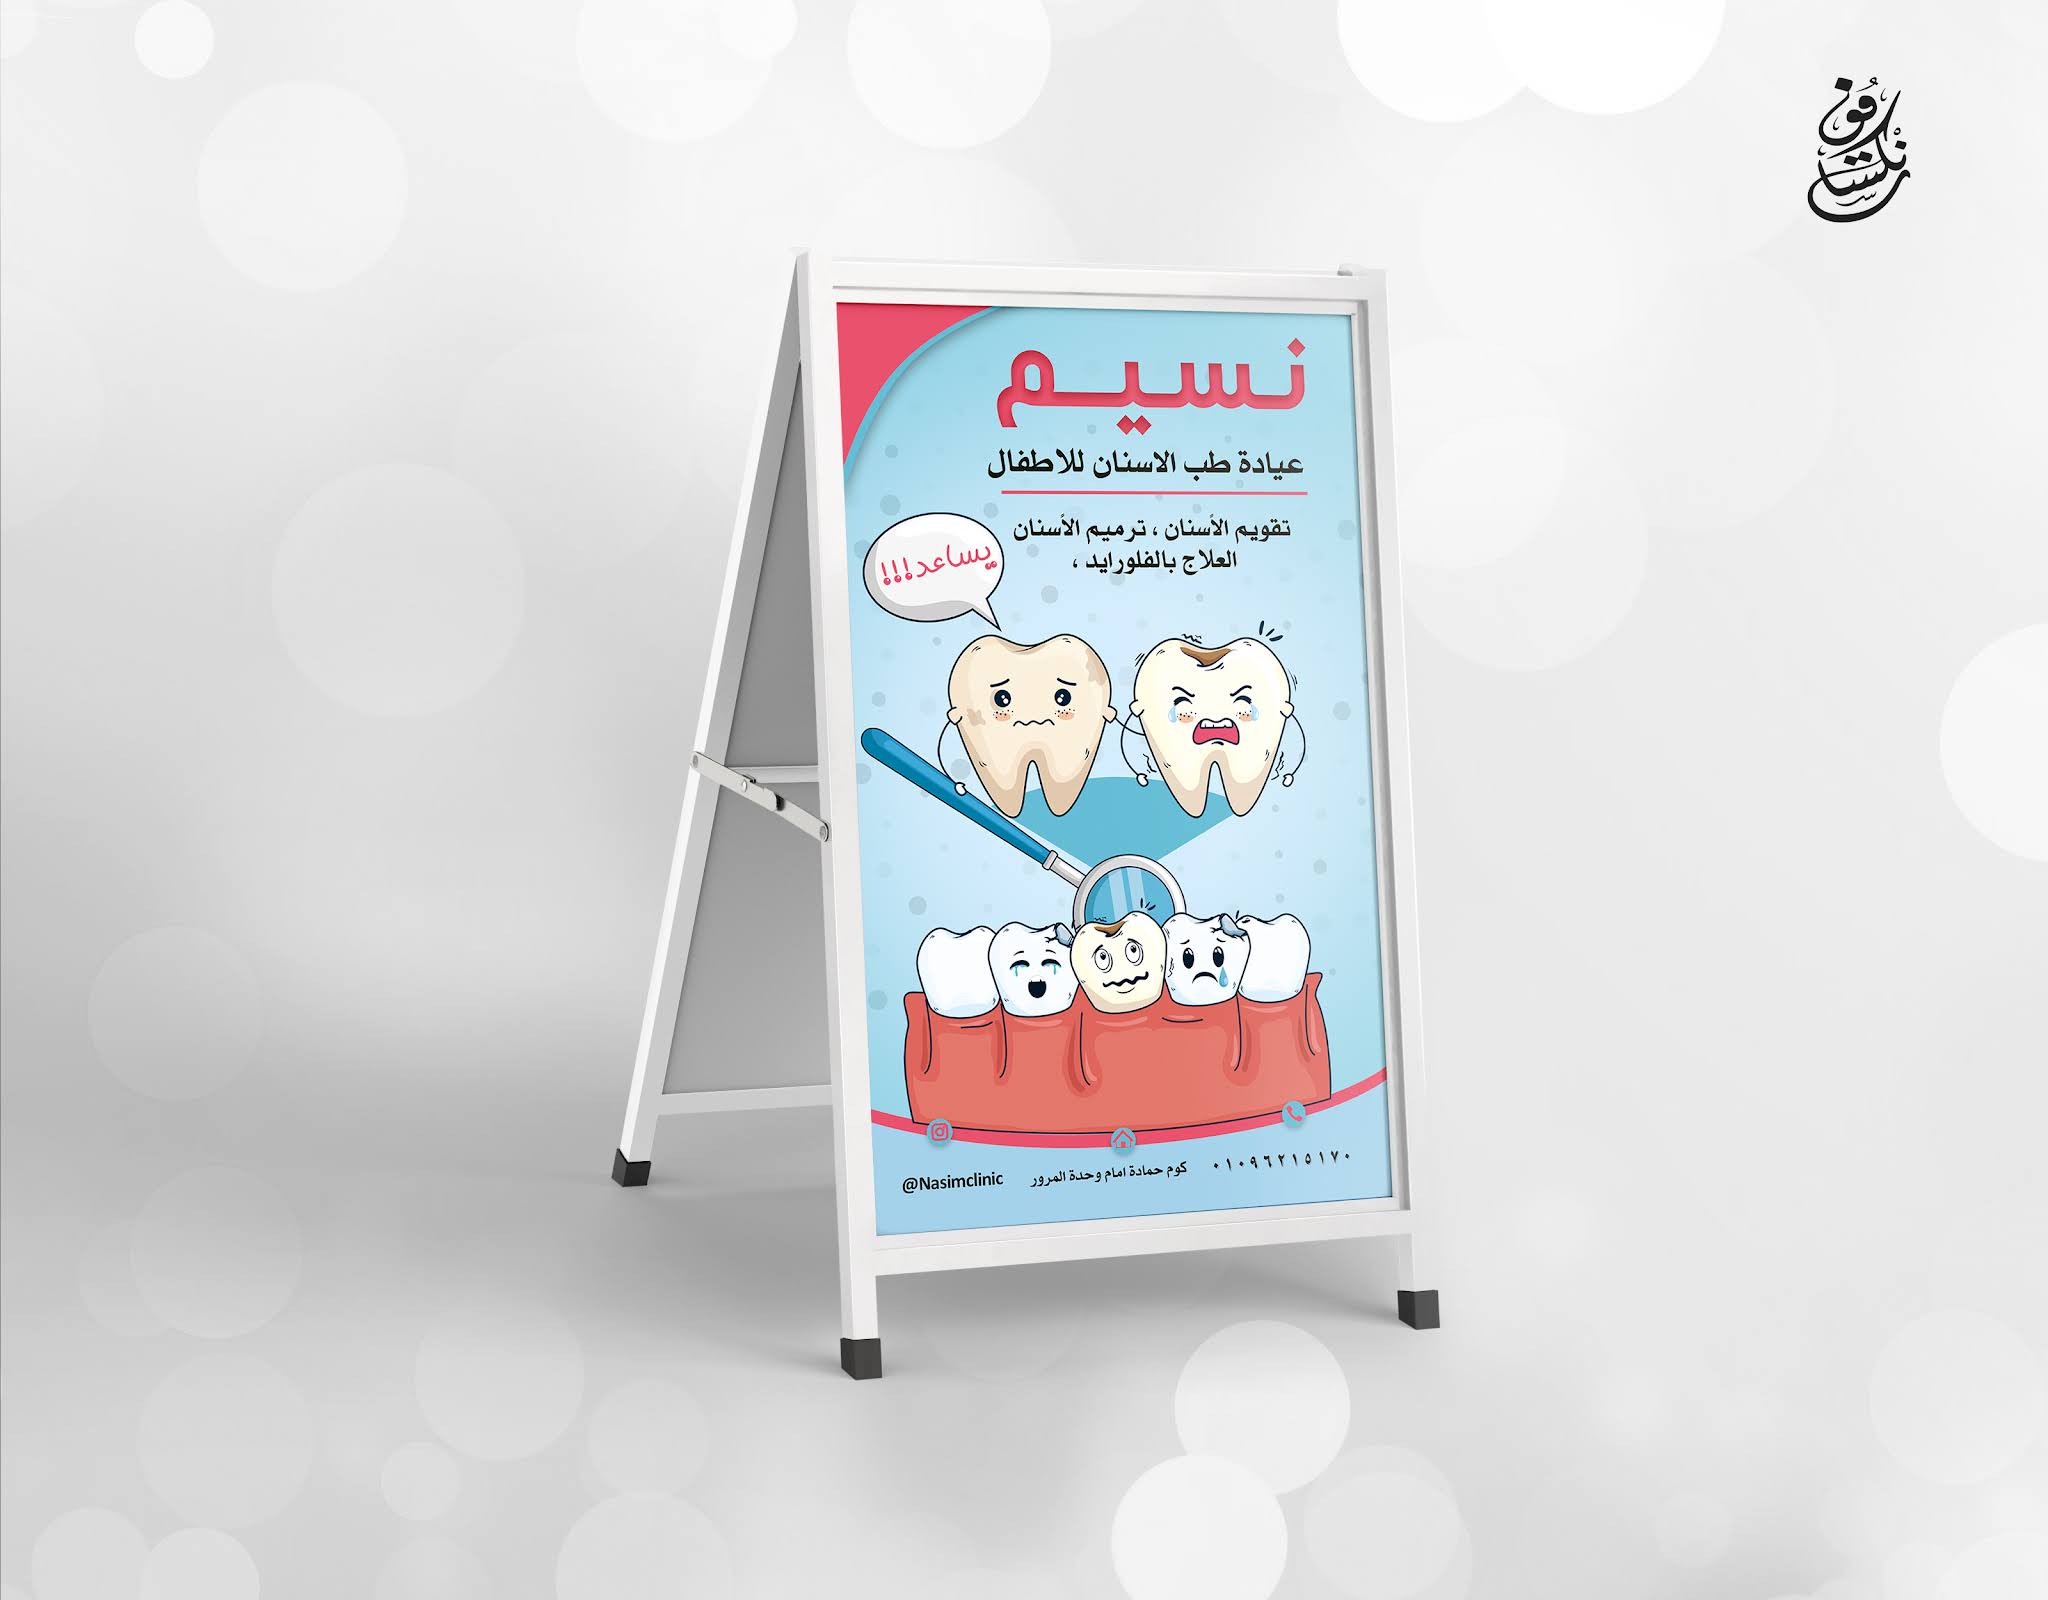 Banner stand advertisements for shops, design No. 4